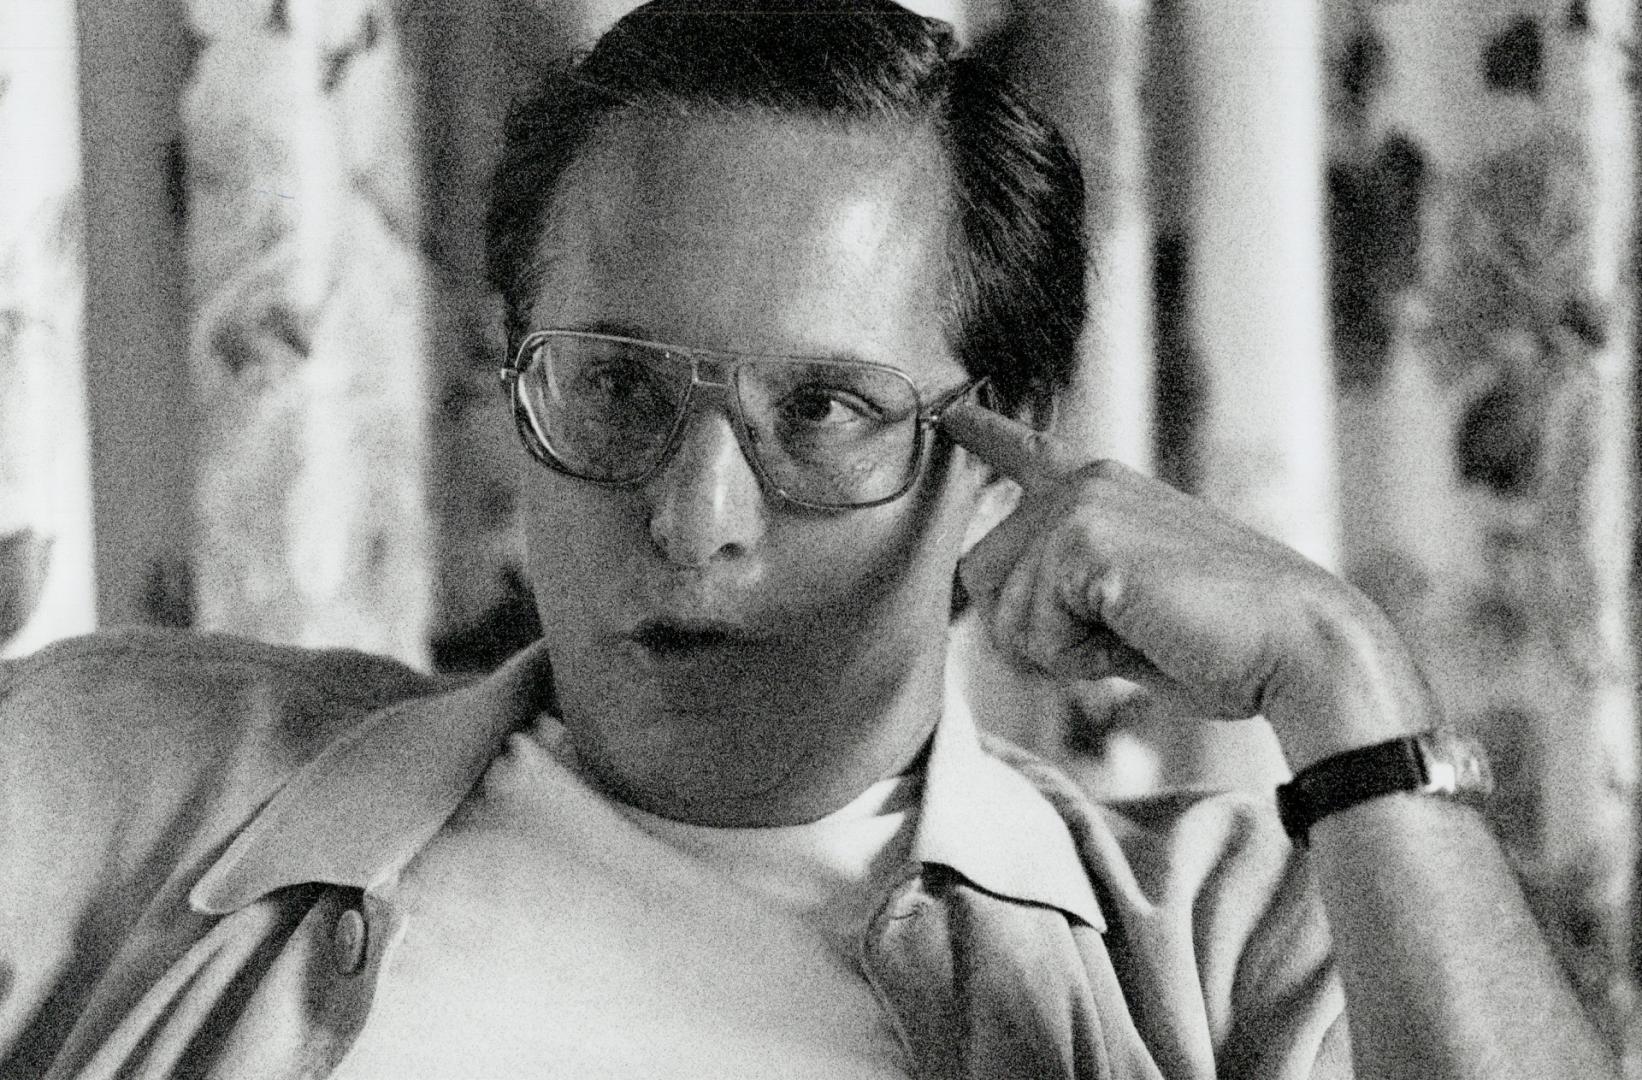 William Friedkin: Academy Award-winning director is relaxing in Toronto for a few days before continuing on to the Montreal World Film Festival later this week